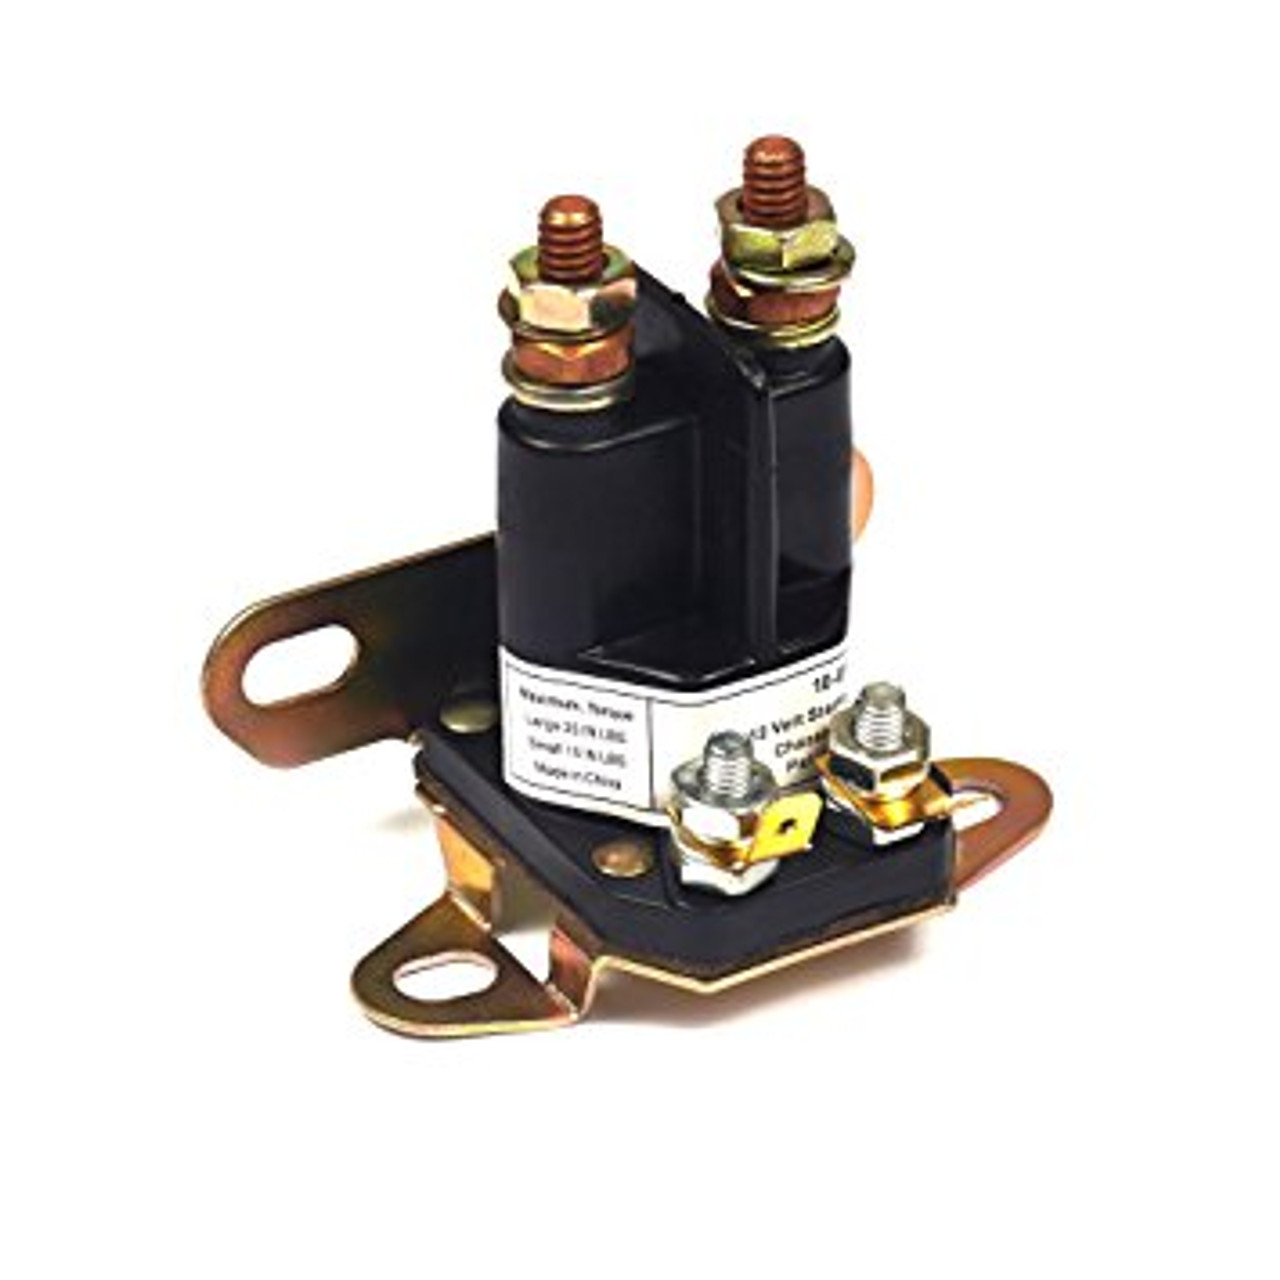 Fits most 12-Volt Starters
Genuine Briggs and Stratton Part
4-Terminal Starter Solenoid
New Briggs and Stratton OEM Replacement Part